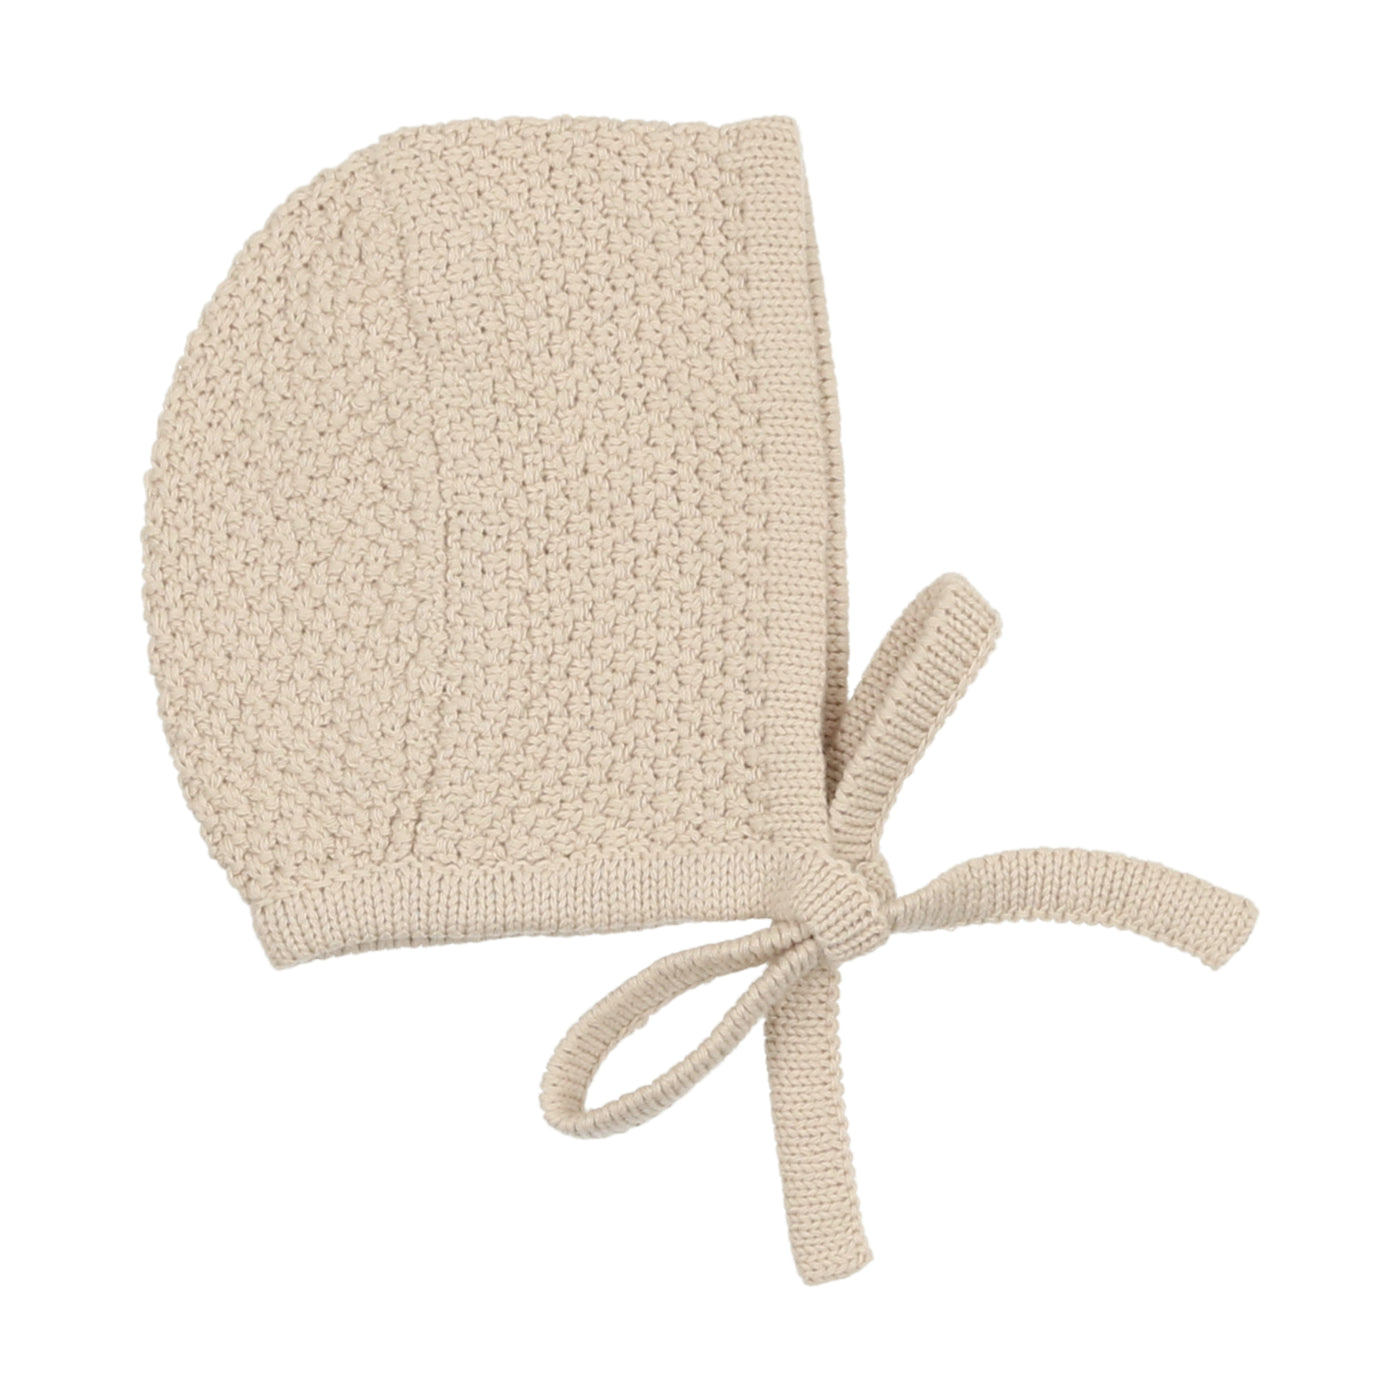 Analogie Cable Knit Natural Footie with Bonnet